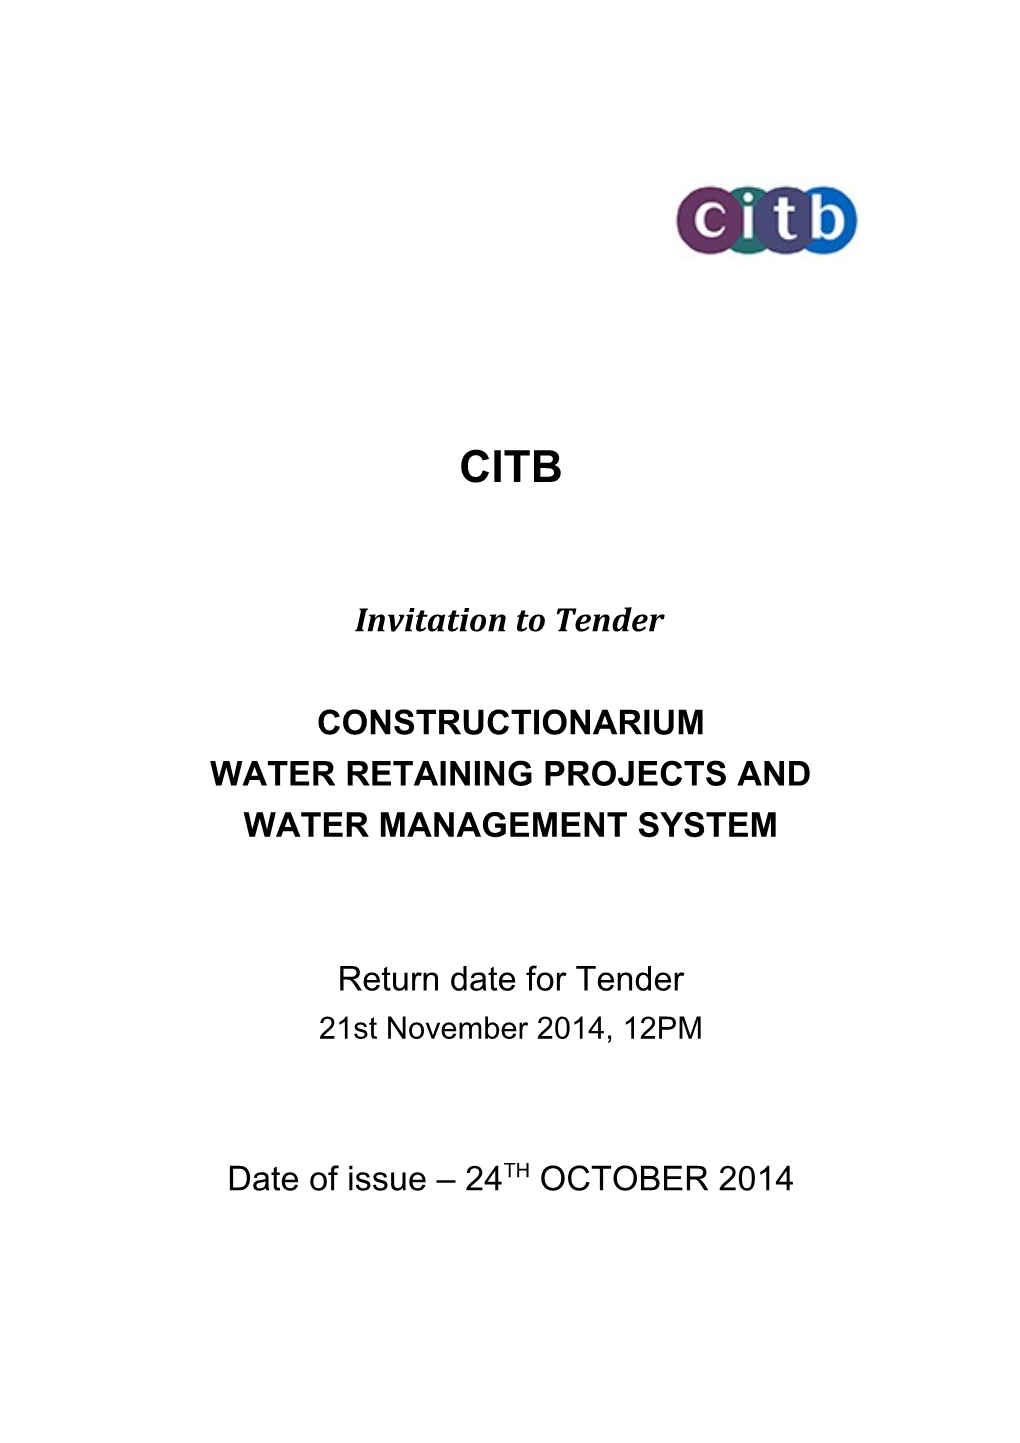 Water Retaining Projects and Water Management System